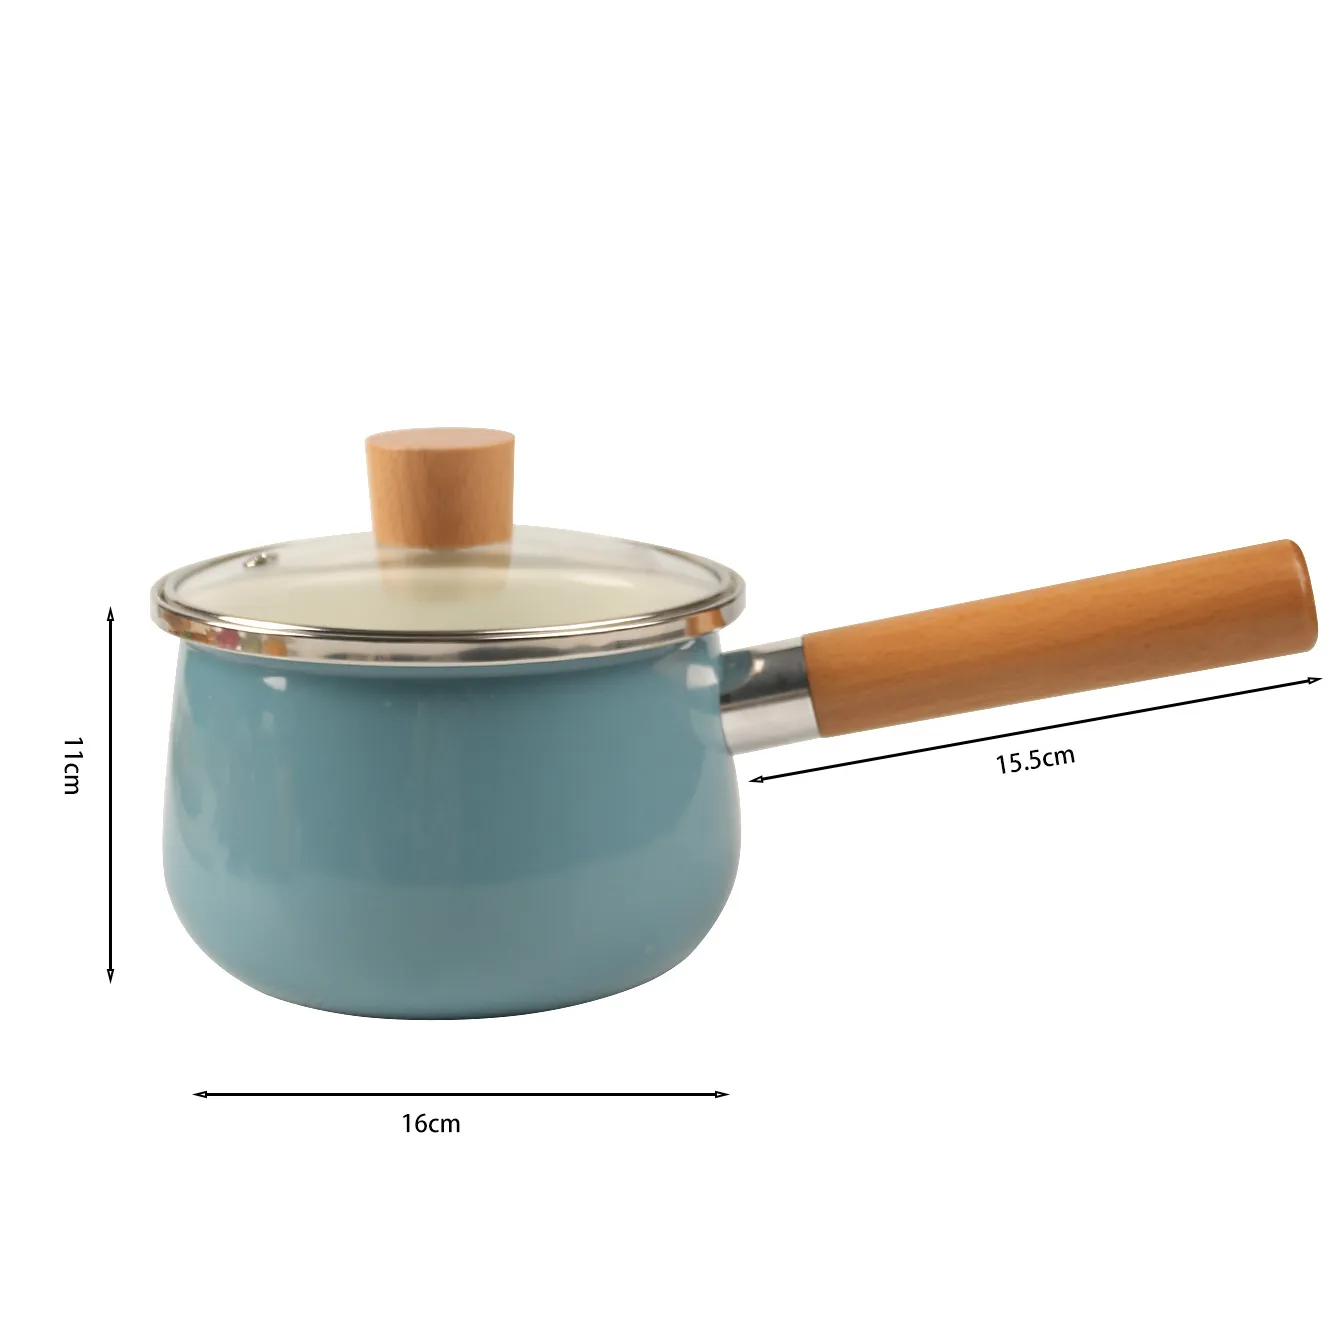 High quality 16cm milk pot enamelware cooking Blue enamel milk boiling pot with glass cover